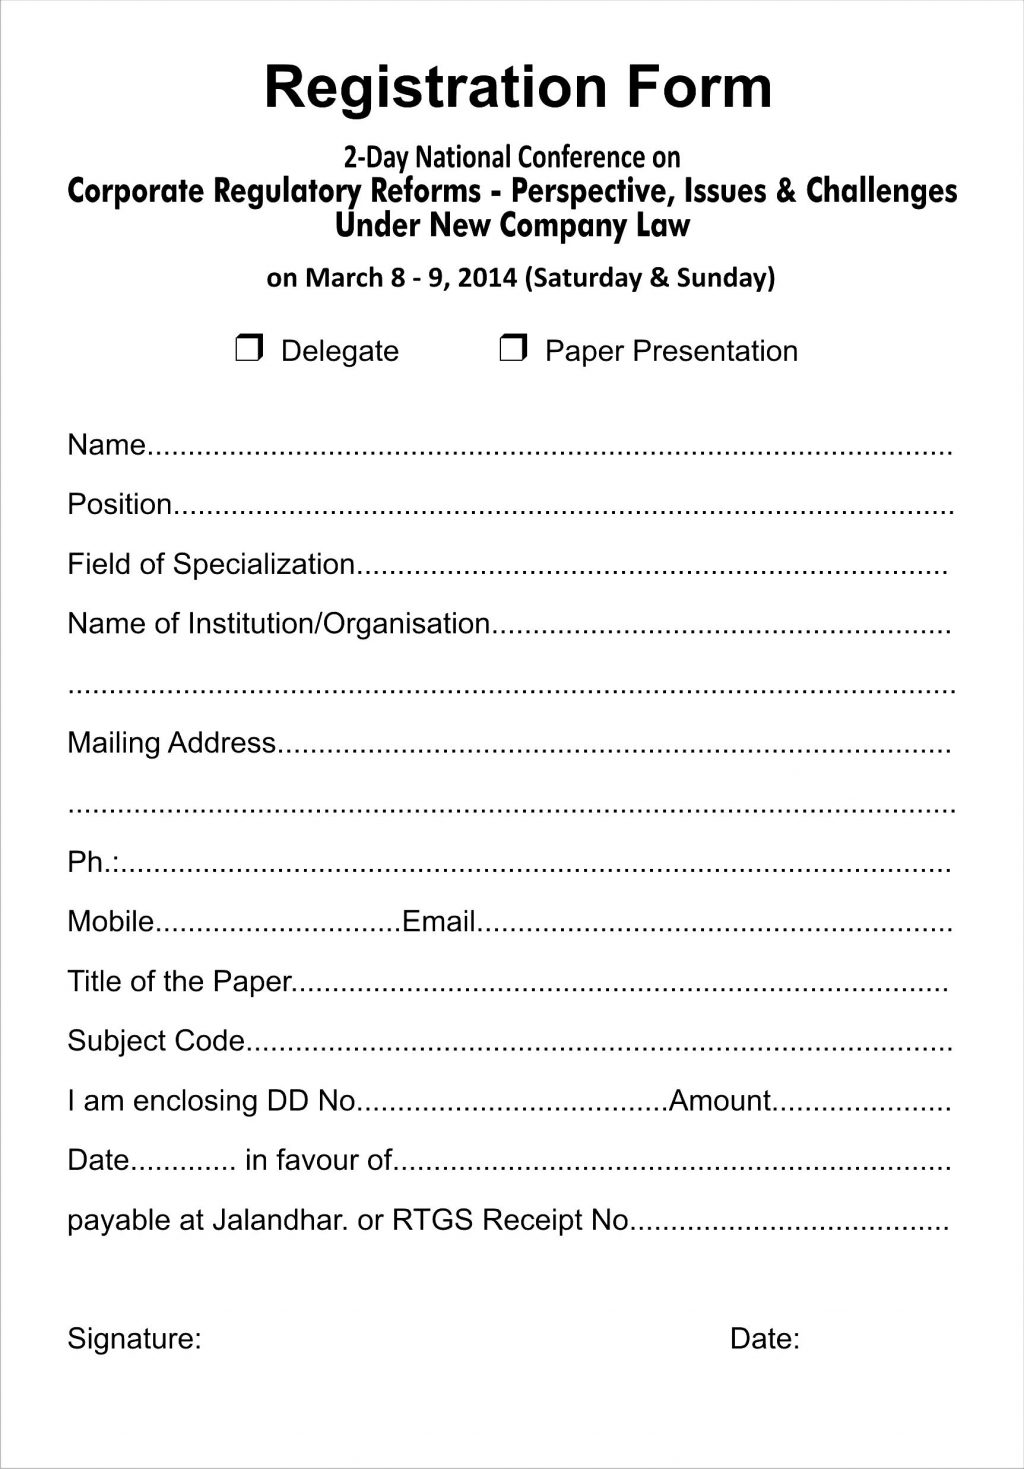 registration form download free   April.onthemarch.co